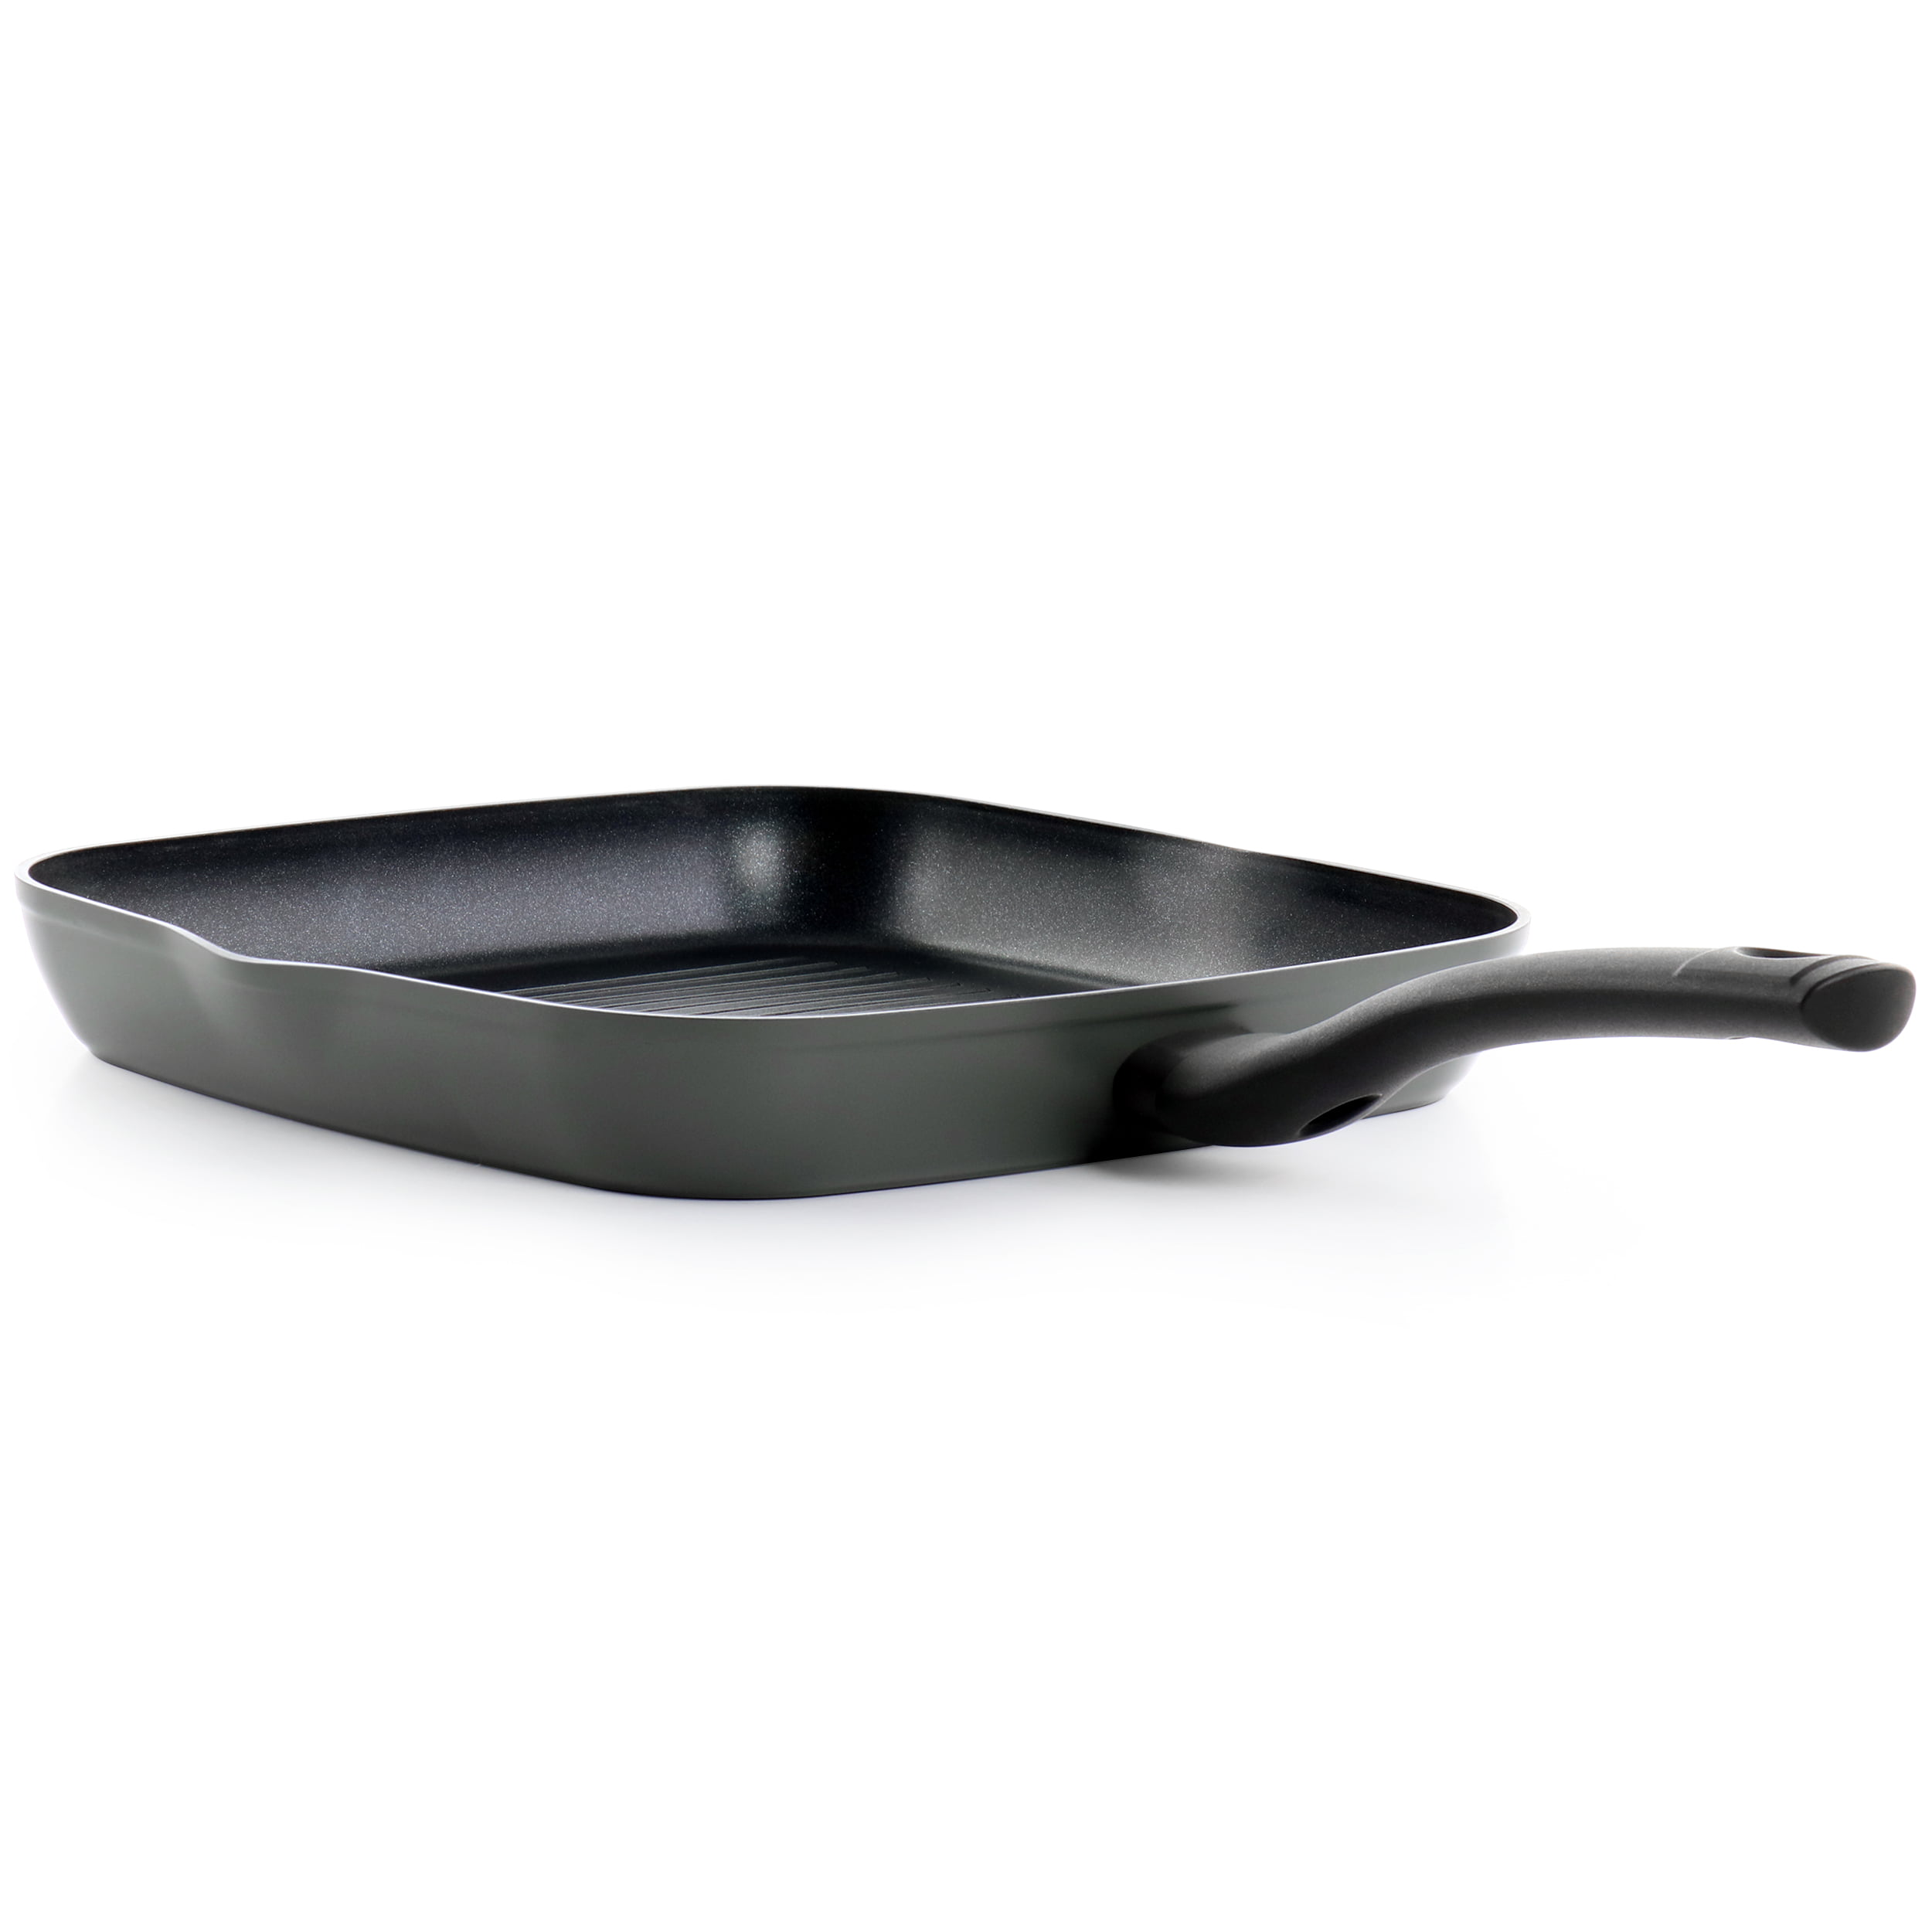 Oster 11 Inch Nonstick Aluminum Pancake Pan - On Sale - Bed Bath & Beyond -  32234226